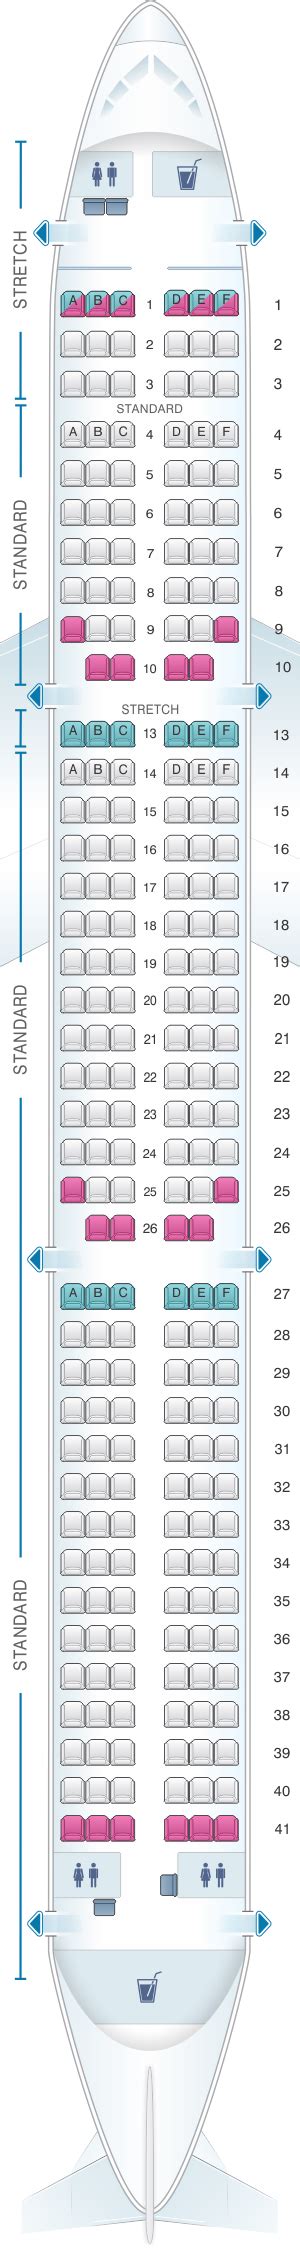 Frontier airlines plane seating chart. Save up to 35% off base rates with Avis & Budget. LEARN MORE. EARN UP TO 60,000 MILES. After Qualifying Account Activity! Terms apply. Apply Now. As Home of Low Fares Done Right, find great deals and cheap flights to destinations all over North America. 